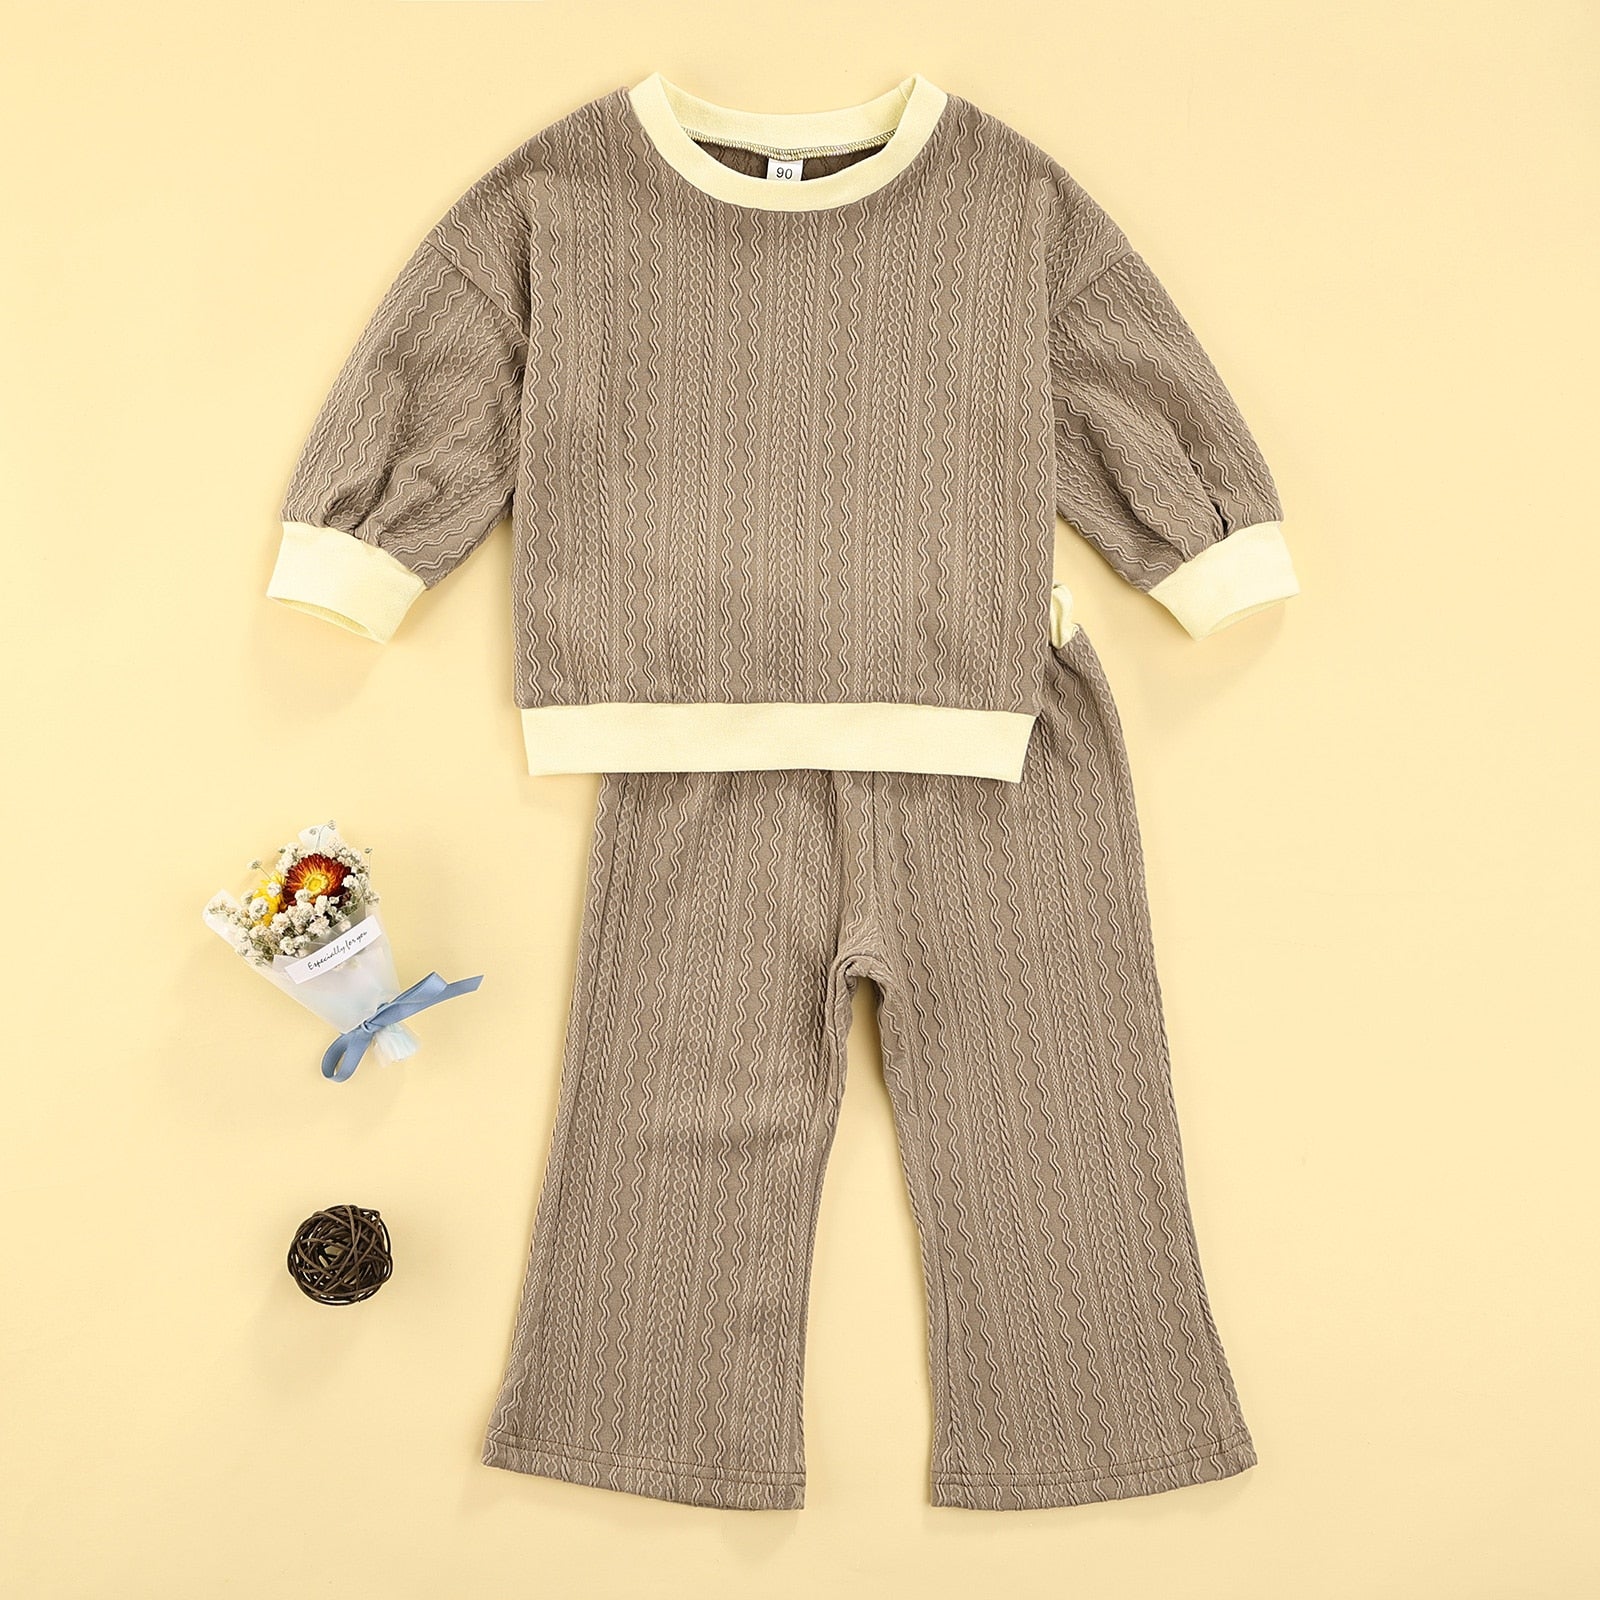 "Comfort and Chic Sweater Set"